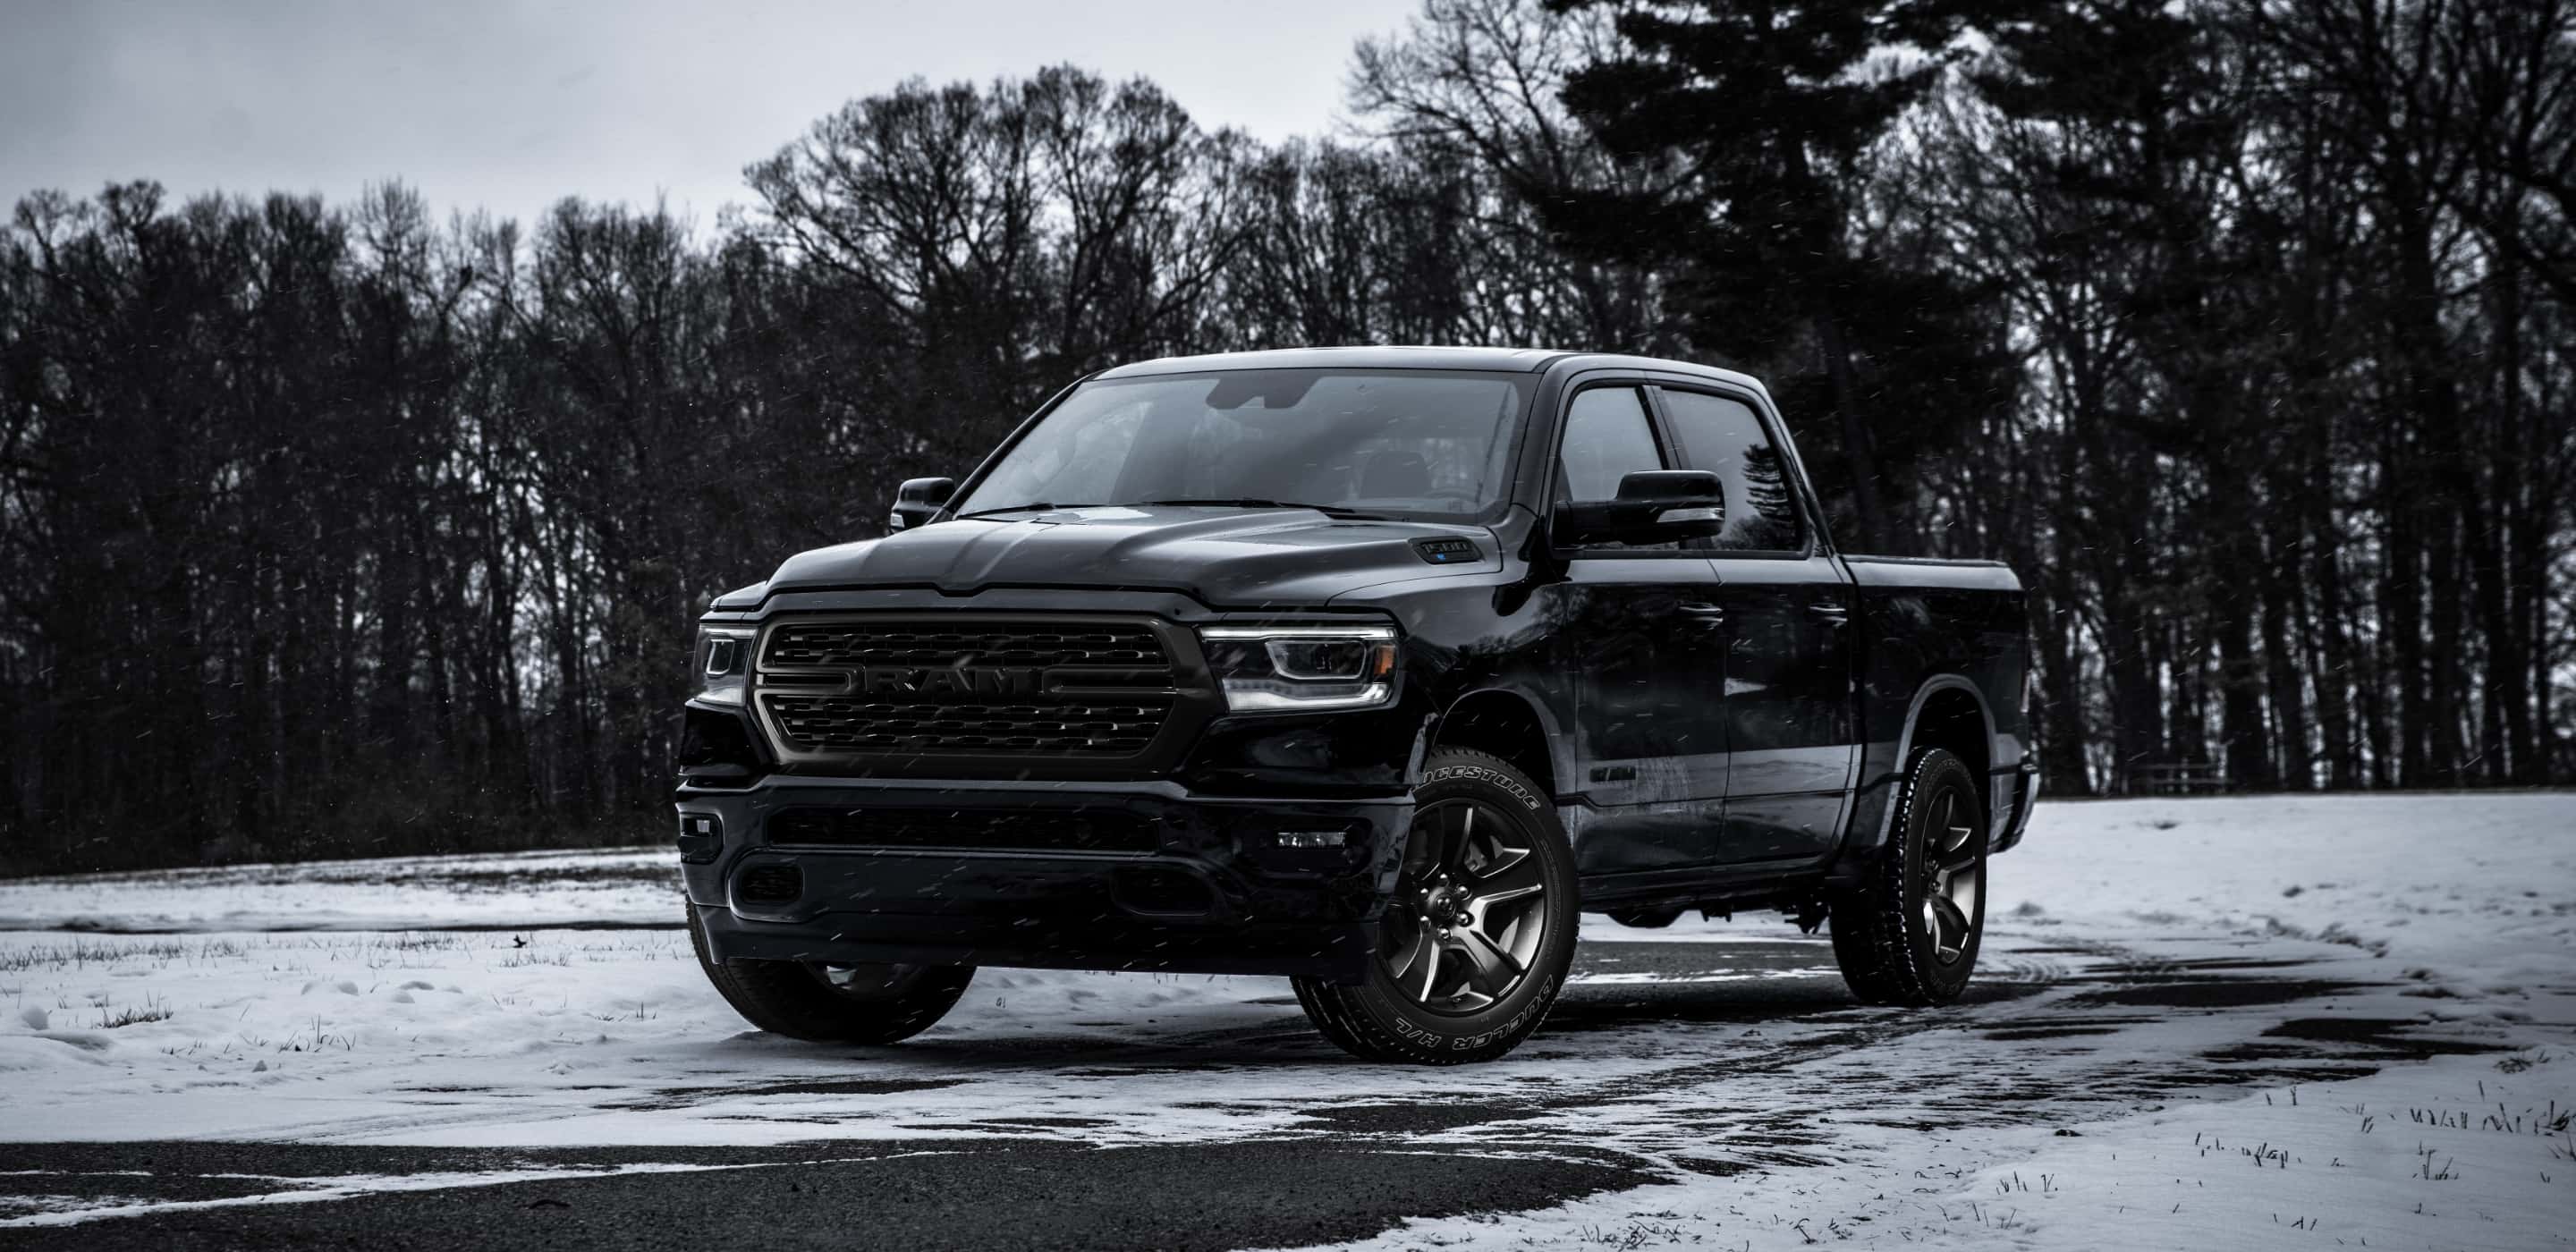 Display The 2022 Ram 1500 parked on a snowy road.